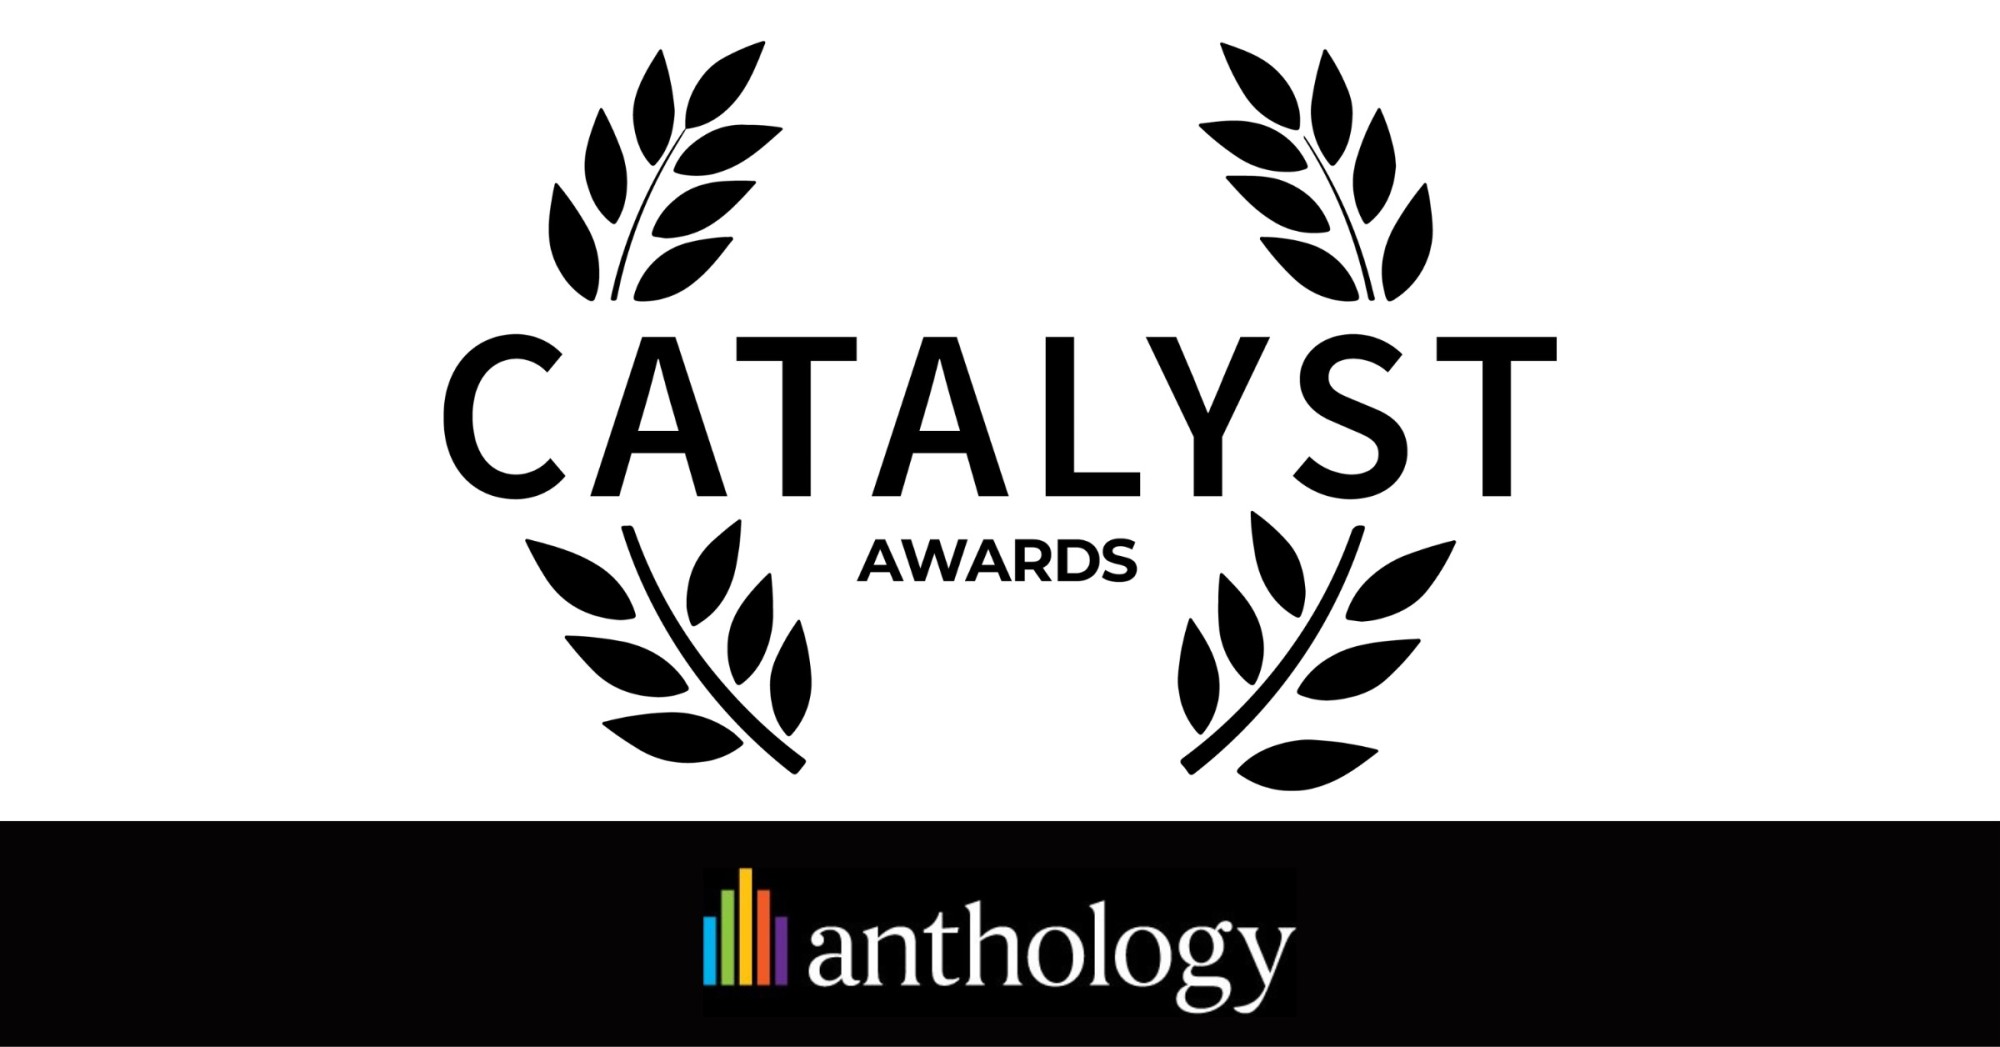 Anthology Announces Winners of the 2023 Catalyst Awards